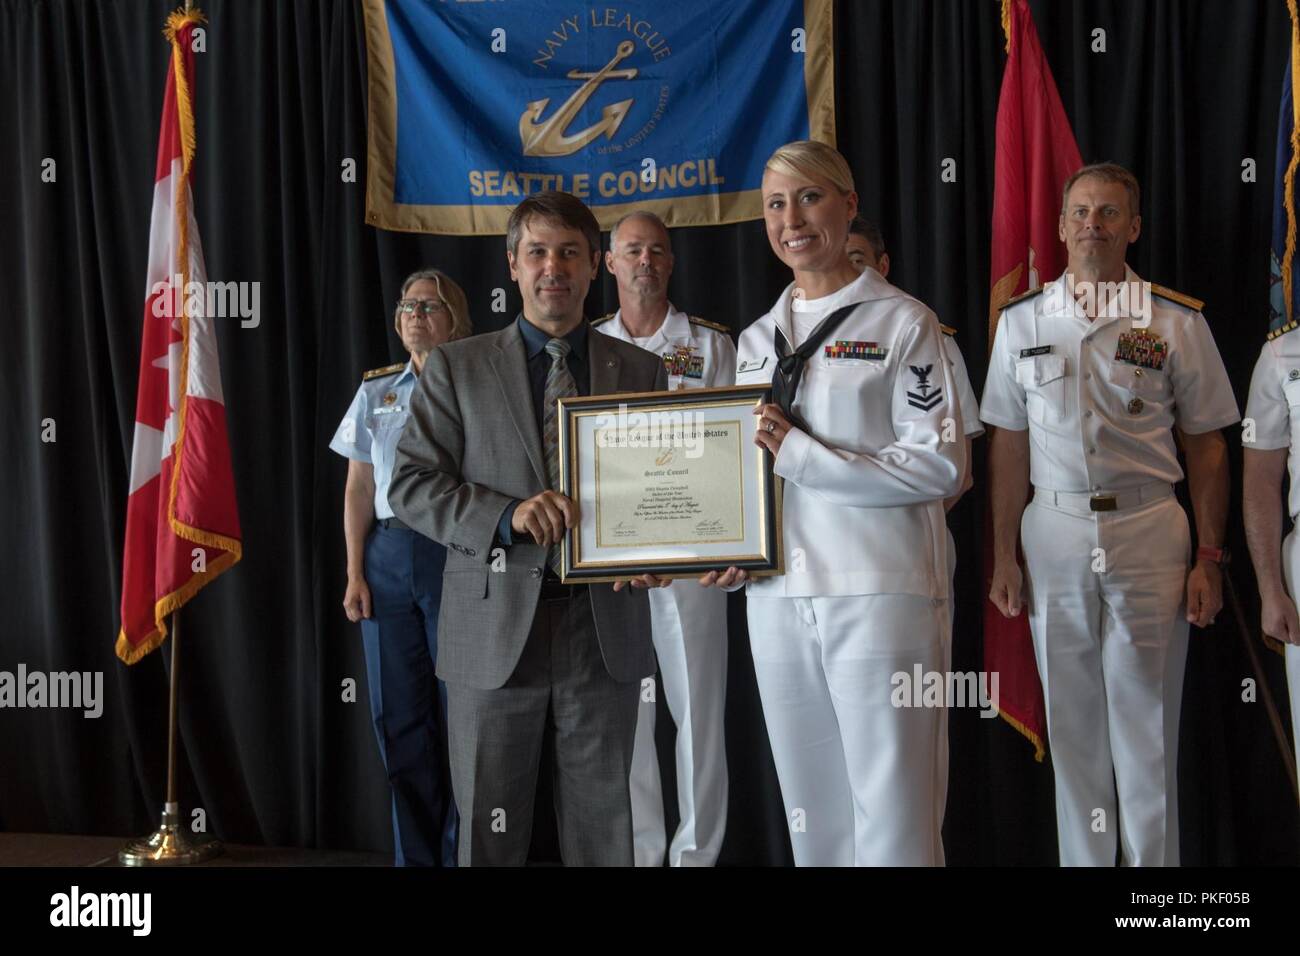 SEATTLE (August 3, 2018) Hospital Corpsman 2nd Class Shasta Campbell is awarded Naval Hospital Bremerton Sailor of the Year during a Seattle Navy League Sea Services Luncheon as part of Seattle’s Seafair Fleet Week. Seafair Fleet Week is an annual celebration of the sea services wherein Sailors, Marines and Coast Guard members from visiting U.S. Navy and Coast Guard ships and ships from Canada make the city a port of call. Stock Photo